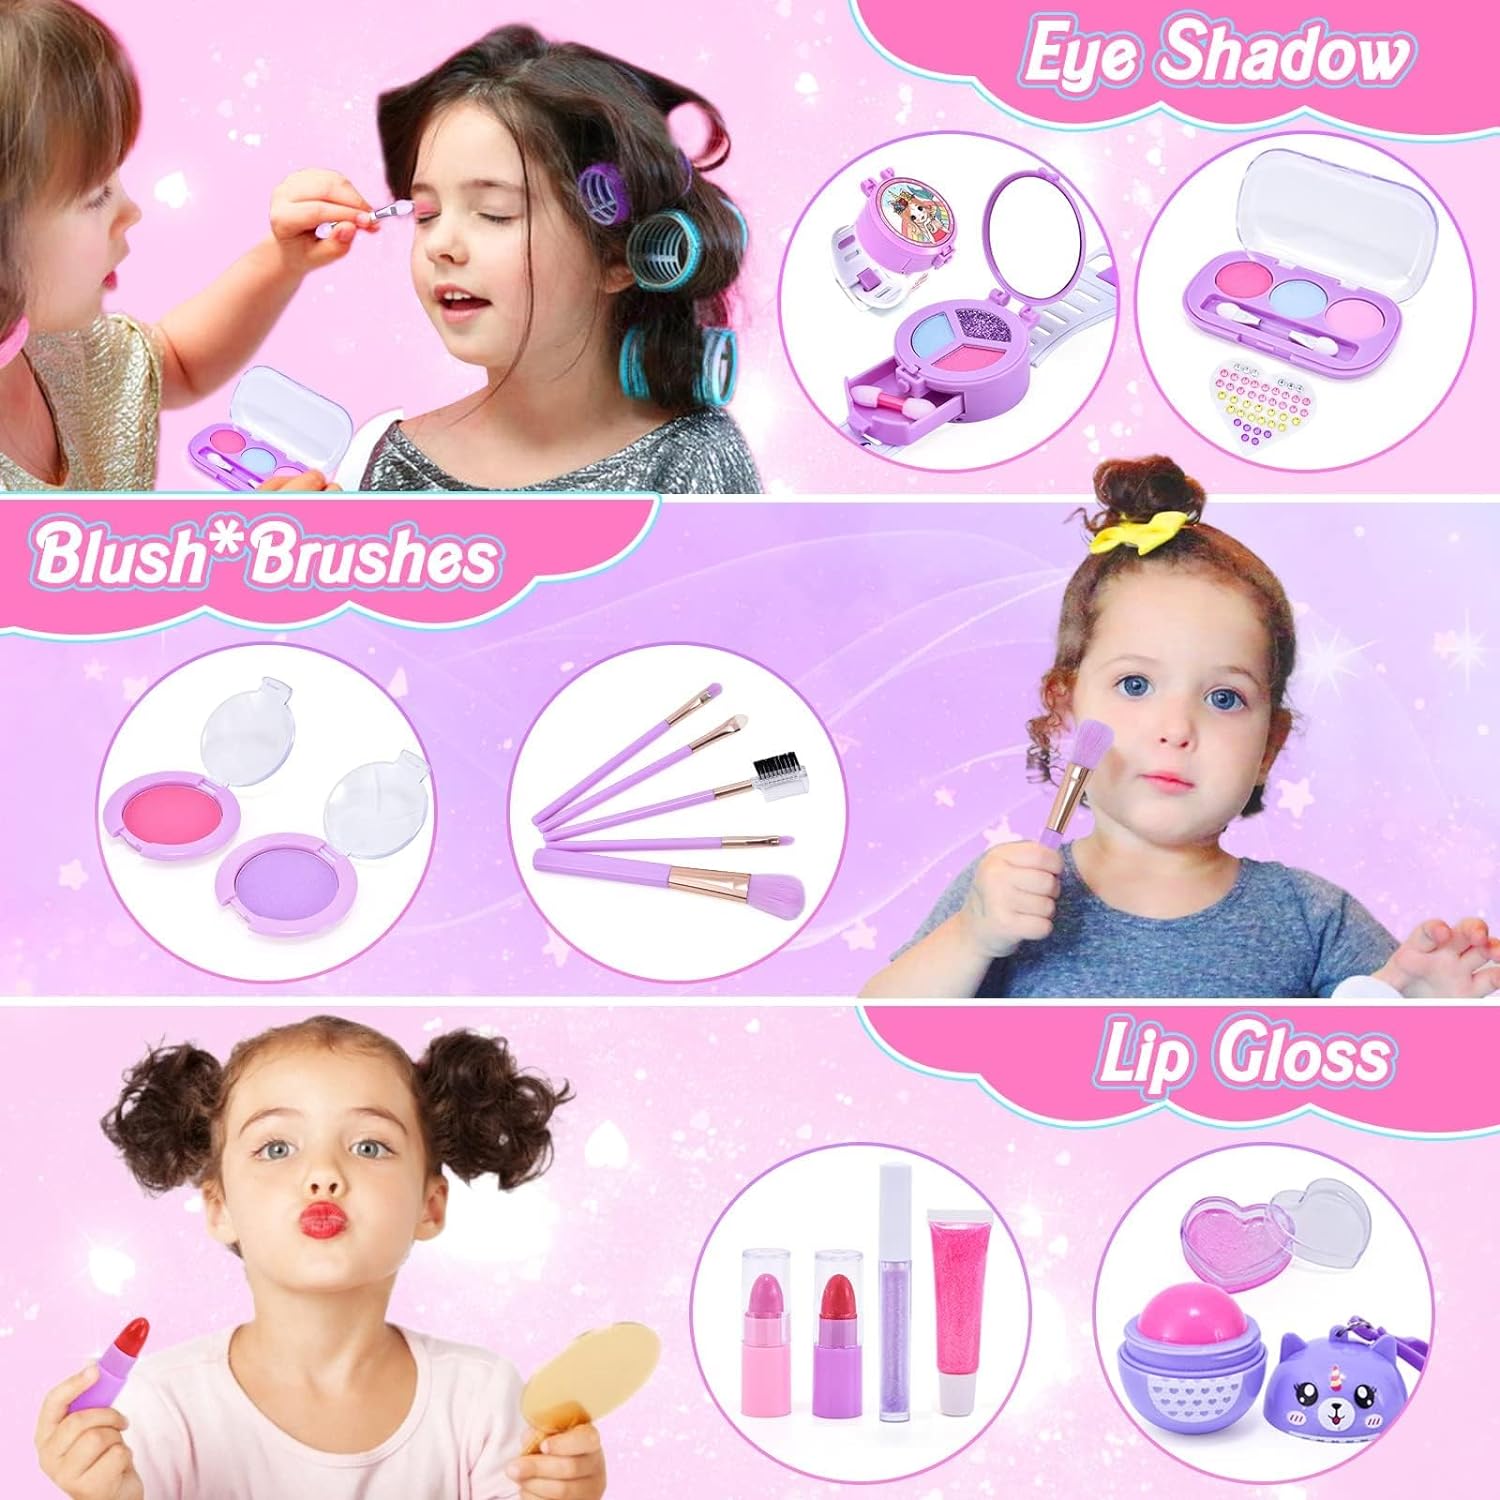 Kids Makeup Kit for Girls, Unicorn Makeup Set, Real Washable Make up Kit for Little Girl Princess Toddler Makeup for Kid Birthday Gifts Unicorn Toys for Girls 3 4 5 6 7 8 9 10 Year Old